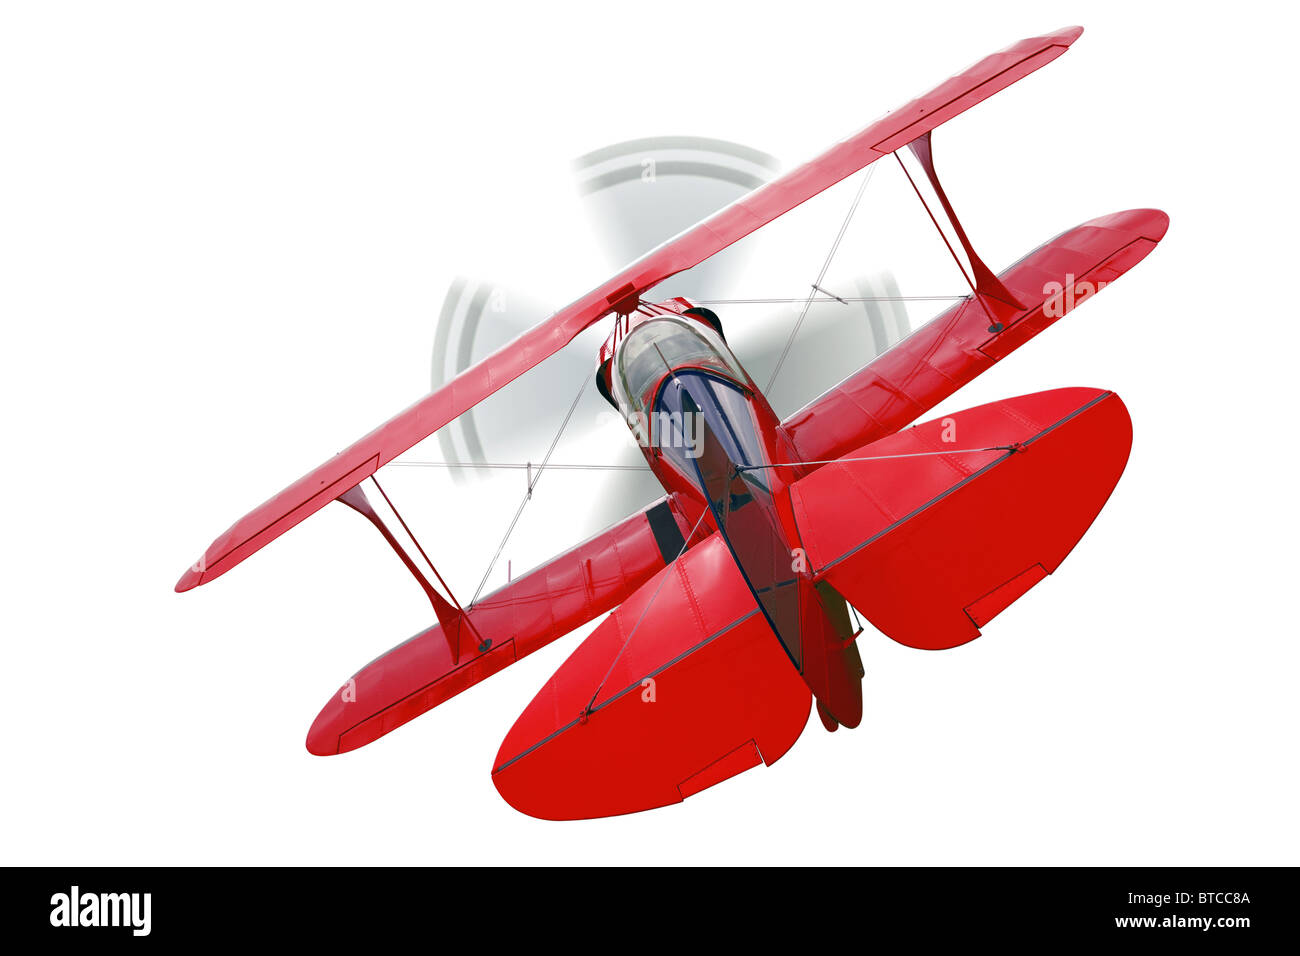 A red biplane, rear view with propeller in motion, isolated on a white background. Stock Photo